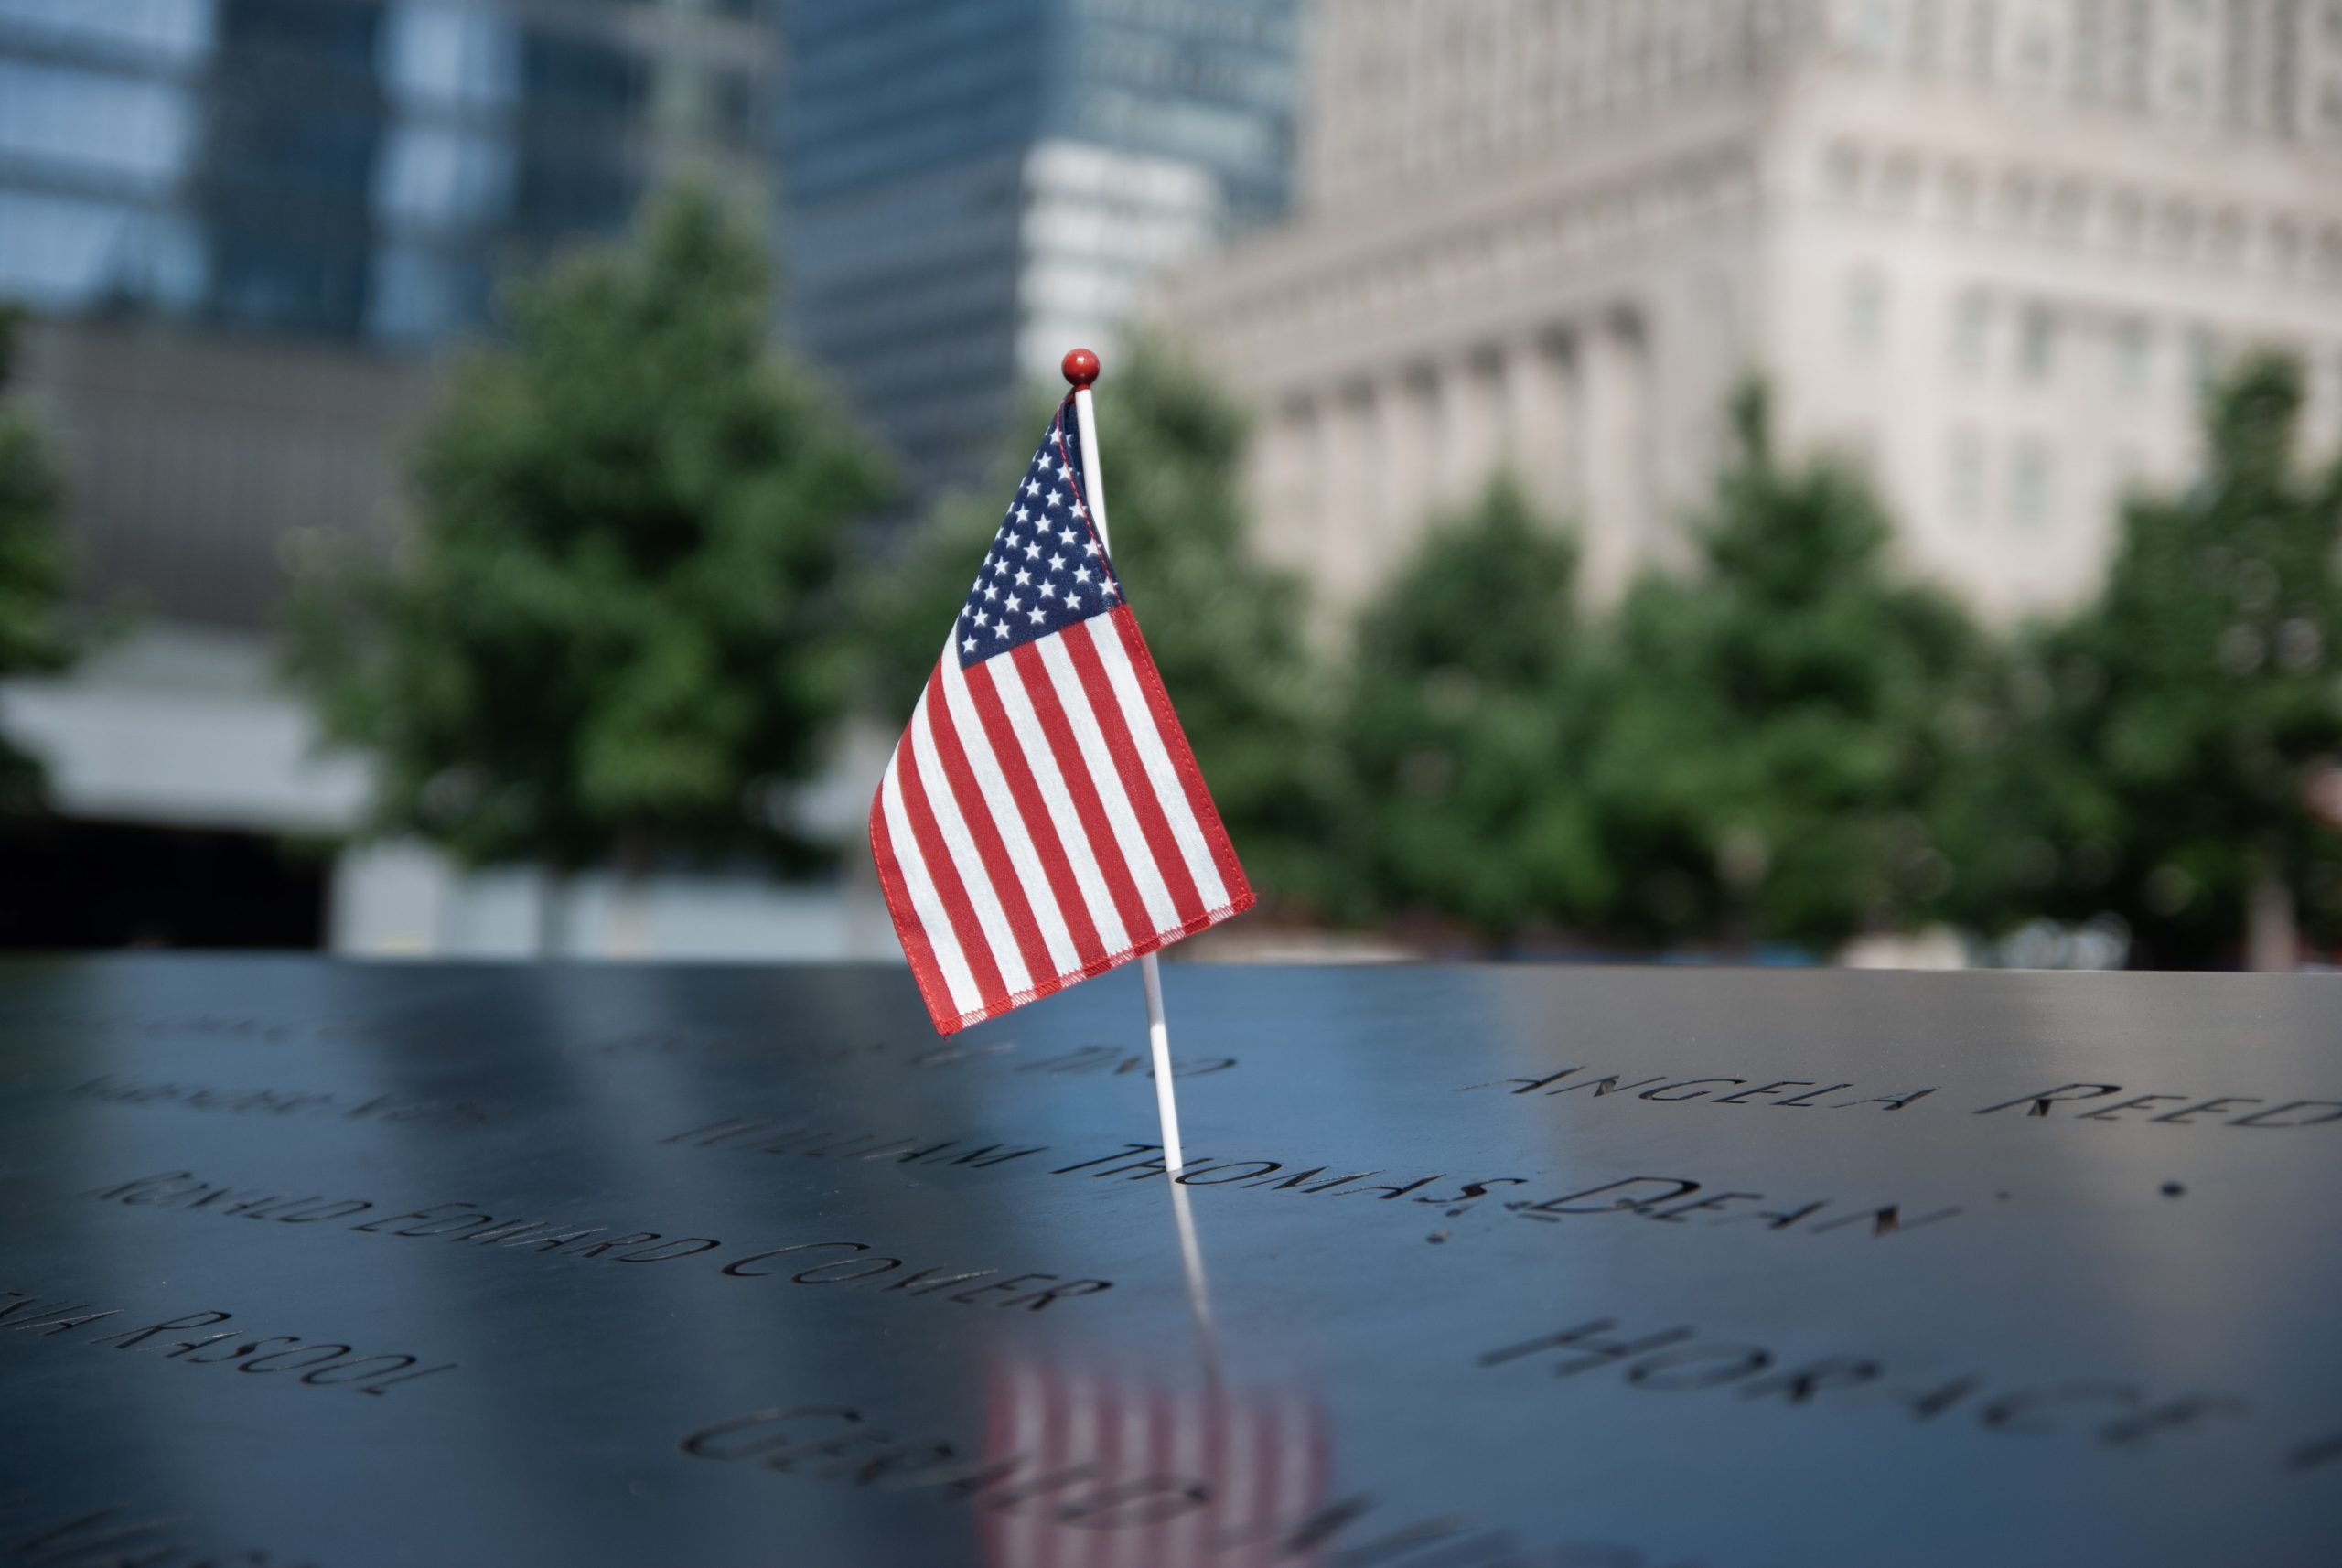 A United States flag place at the world trade center memorial in New York honoring both the victims and the heroes of 9/11.